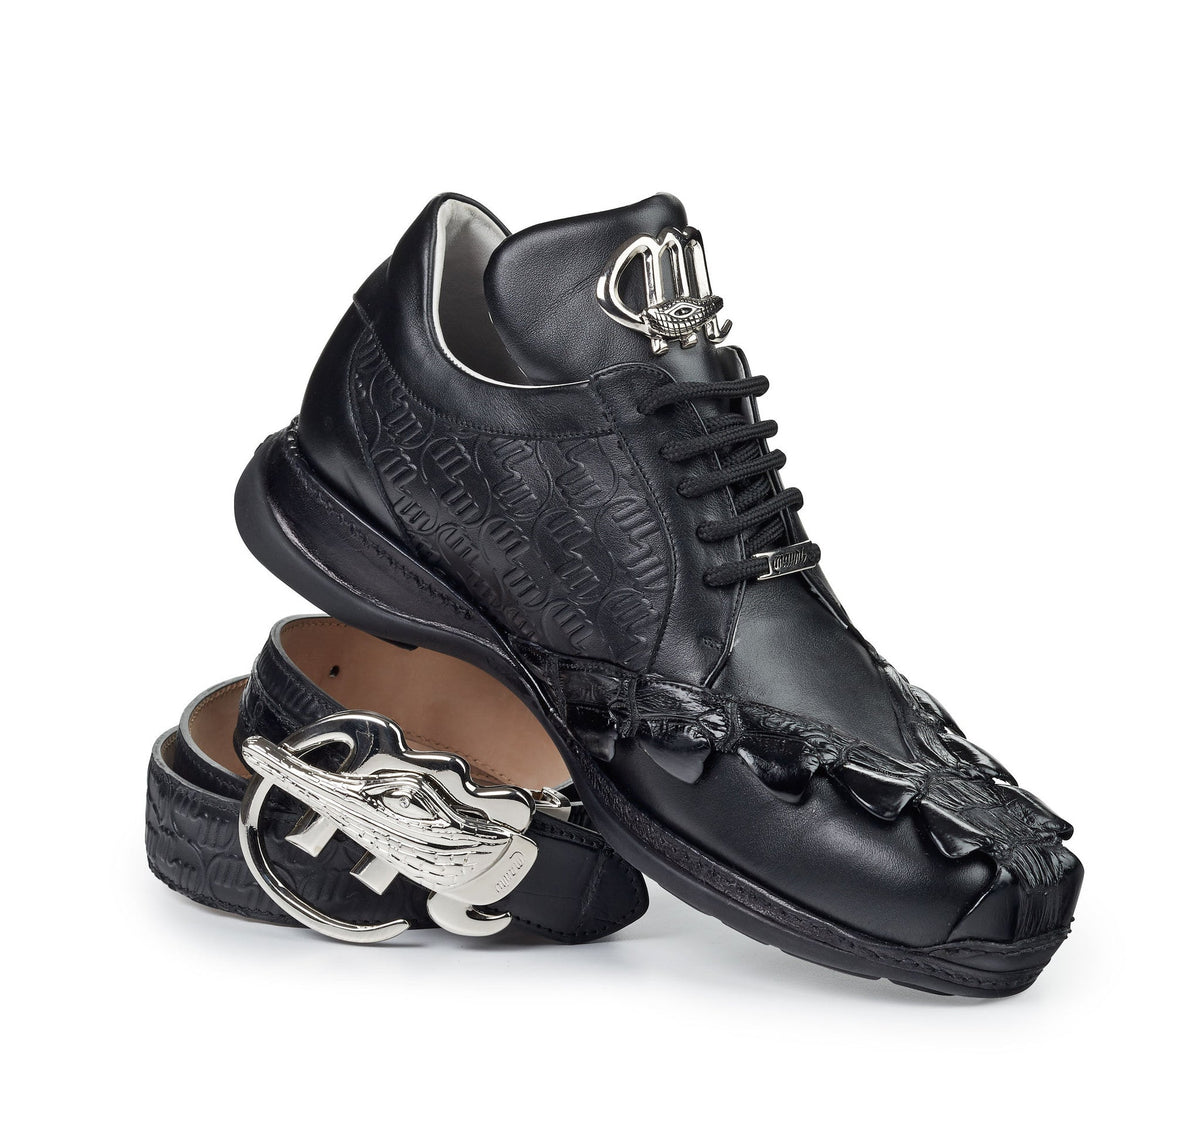 Mauri 8543 Embossed Black Nappa/Hornback Tail Sneakers - Dudes Boutique